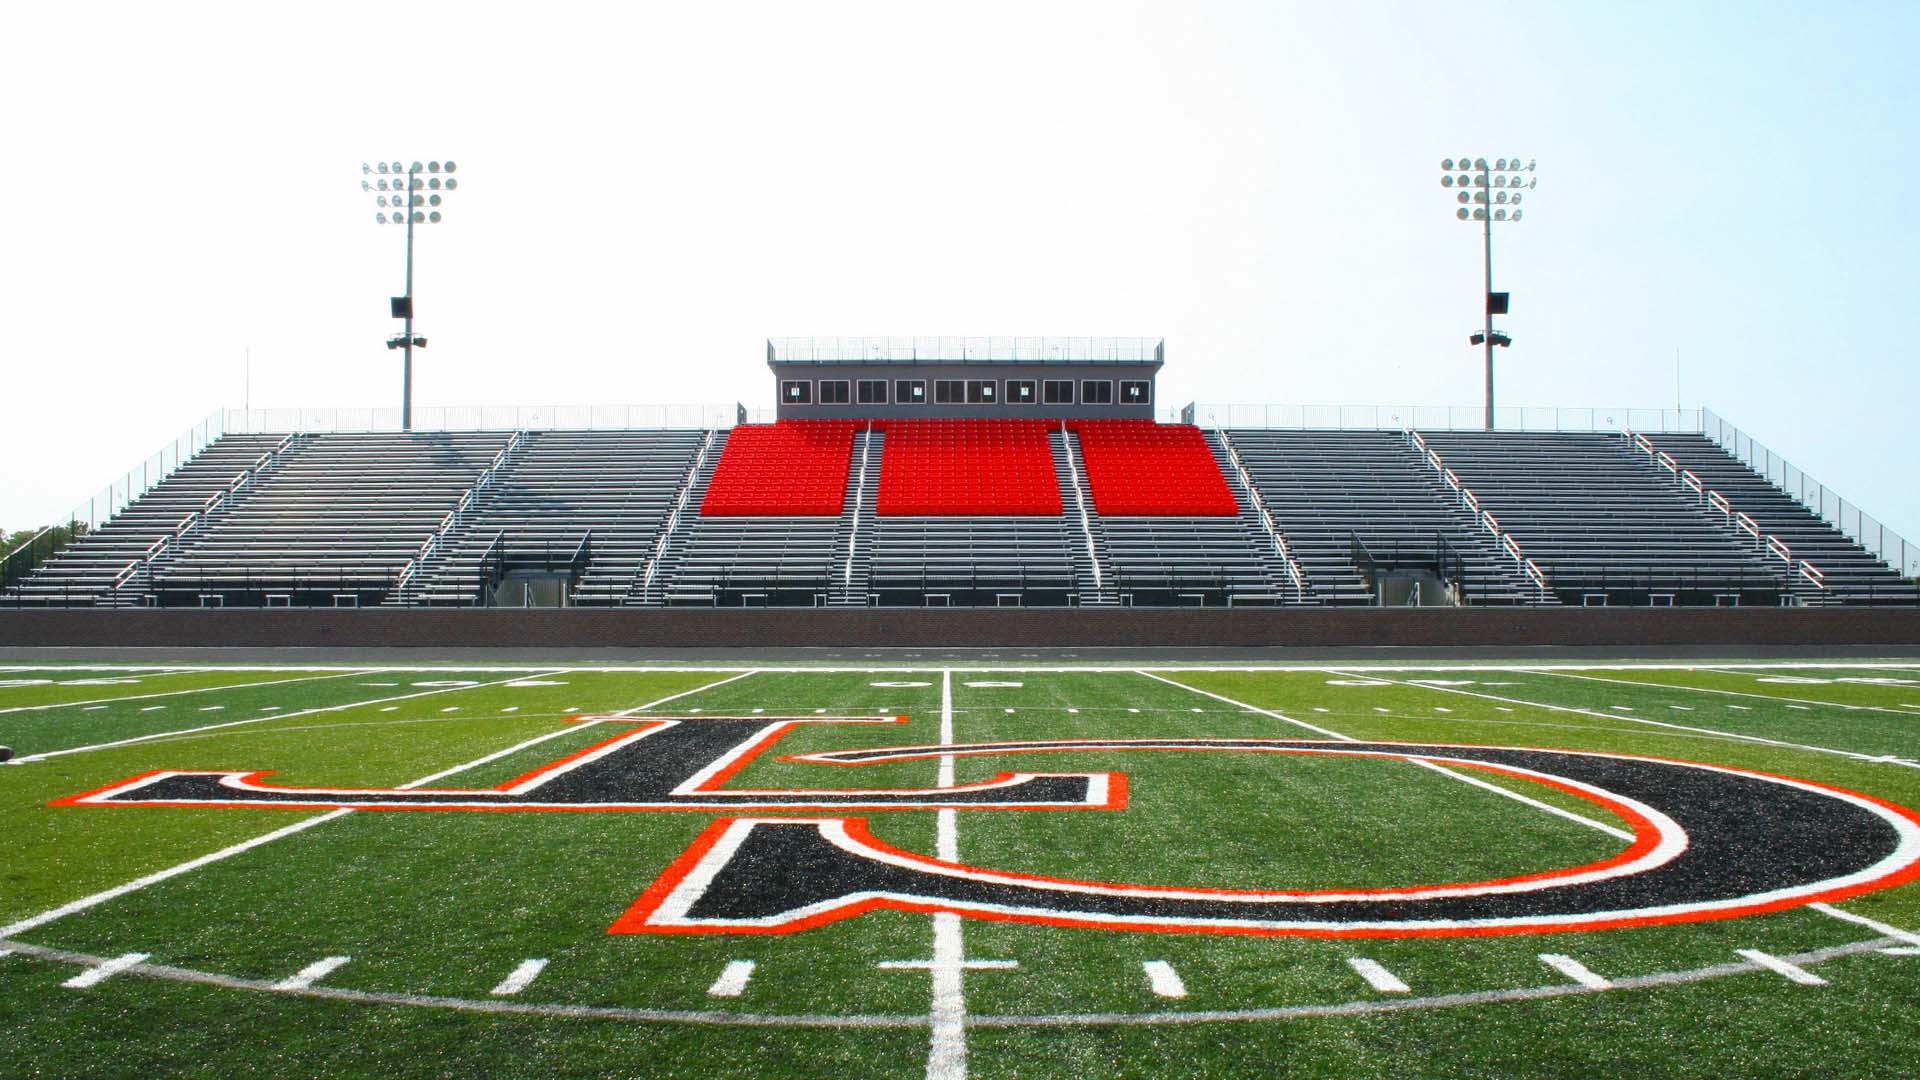 Cape Central High School grandstand contains custom bleacher seats and aluminum bench seating.